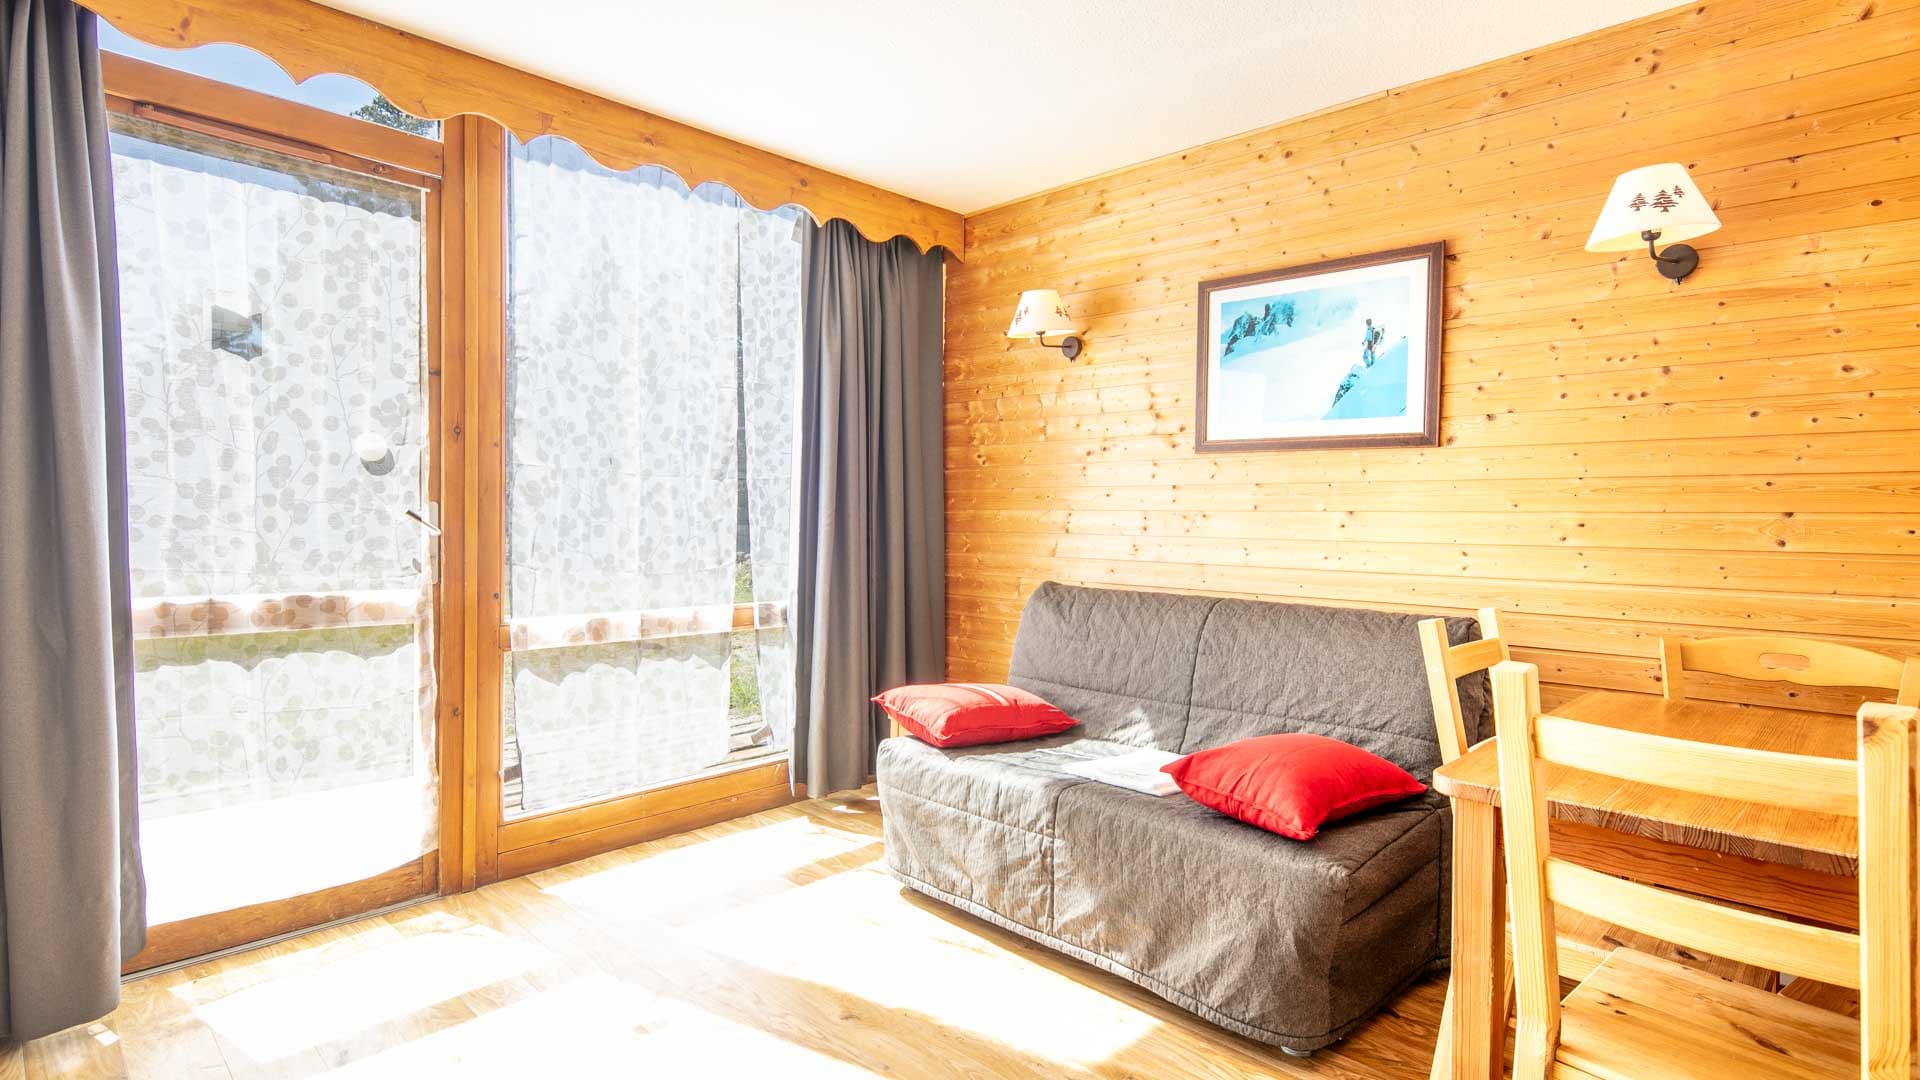 Studio 4 persons - Studio V. du Bachat A04 ASTERS - Appt spacieux 4 pers - Chamrousse